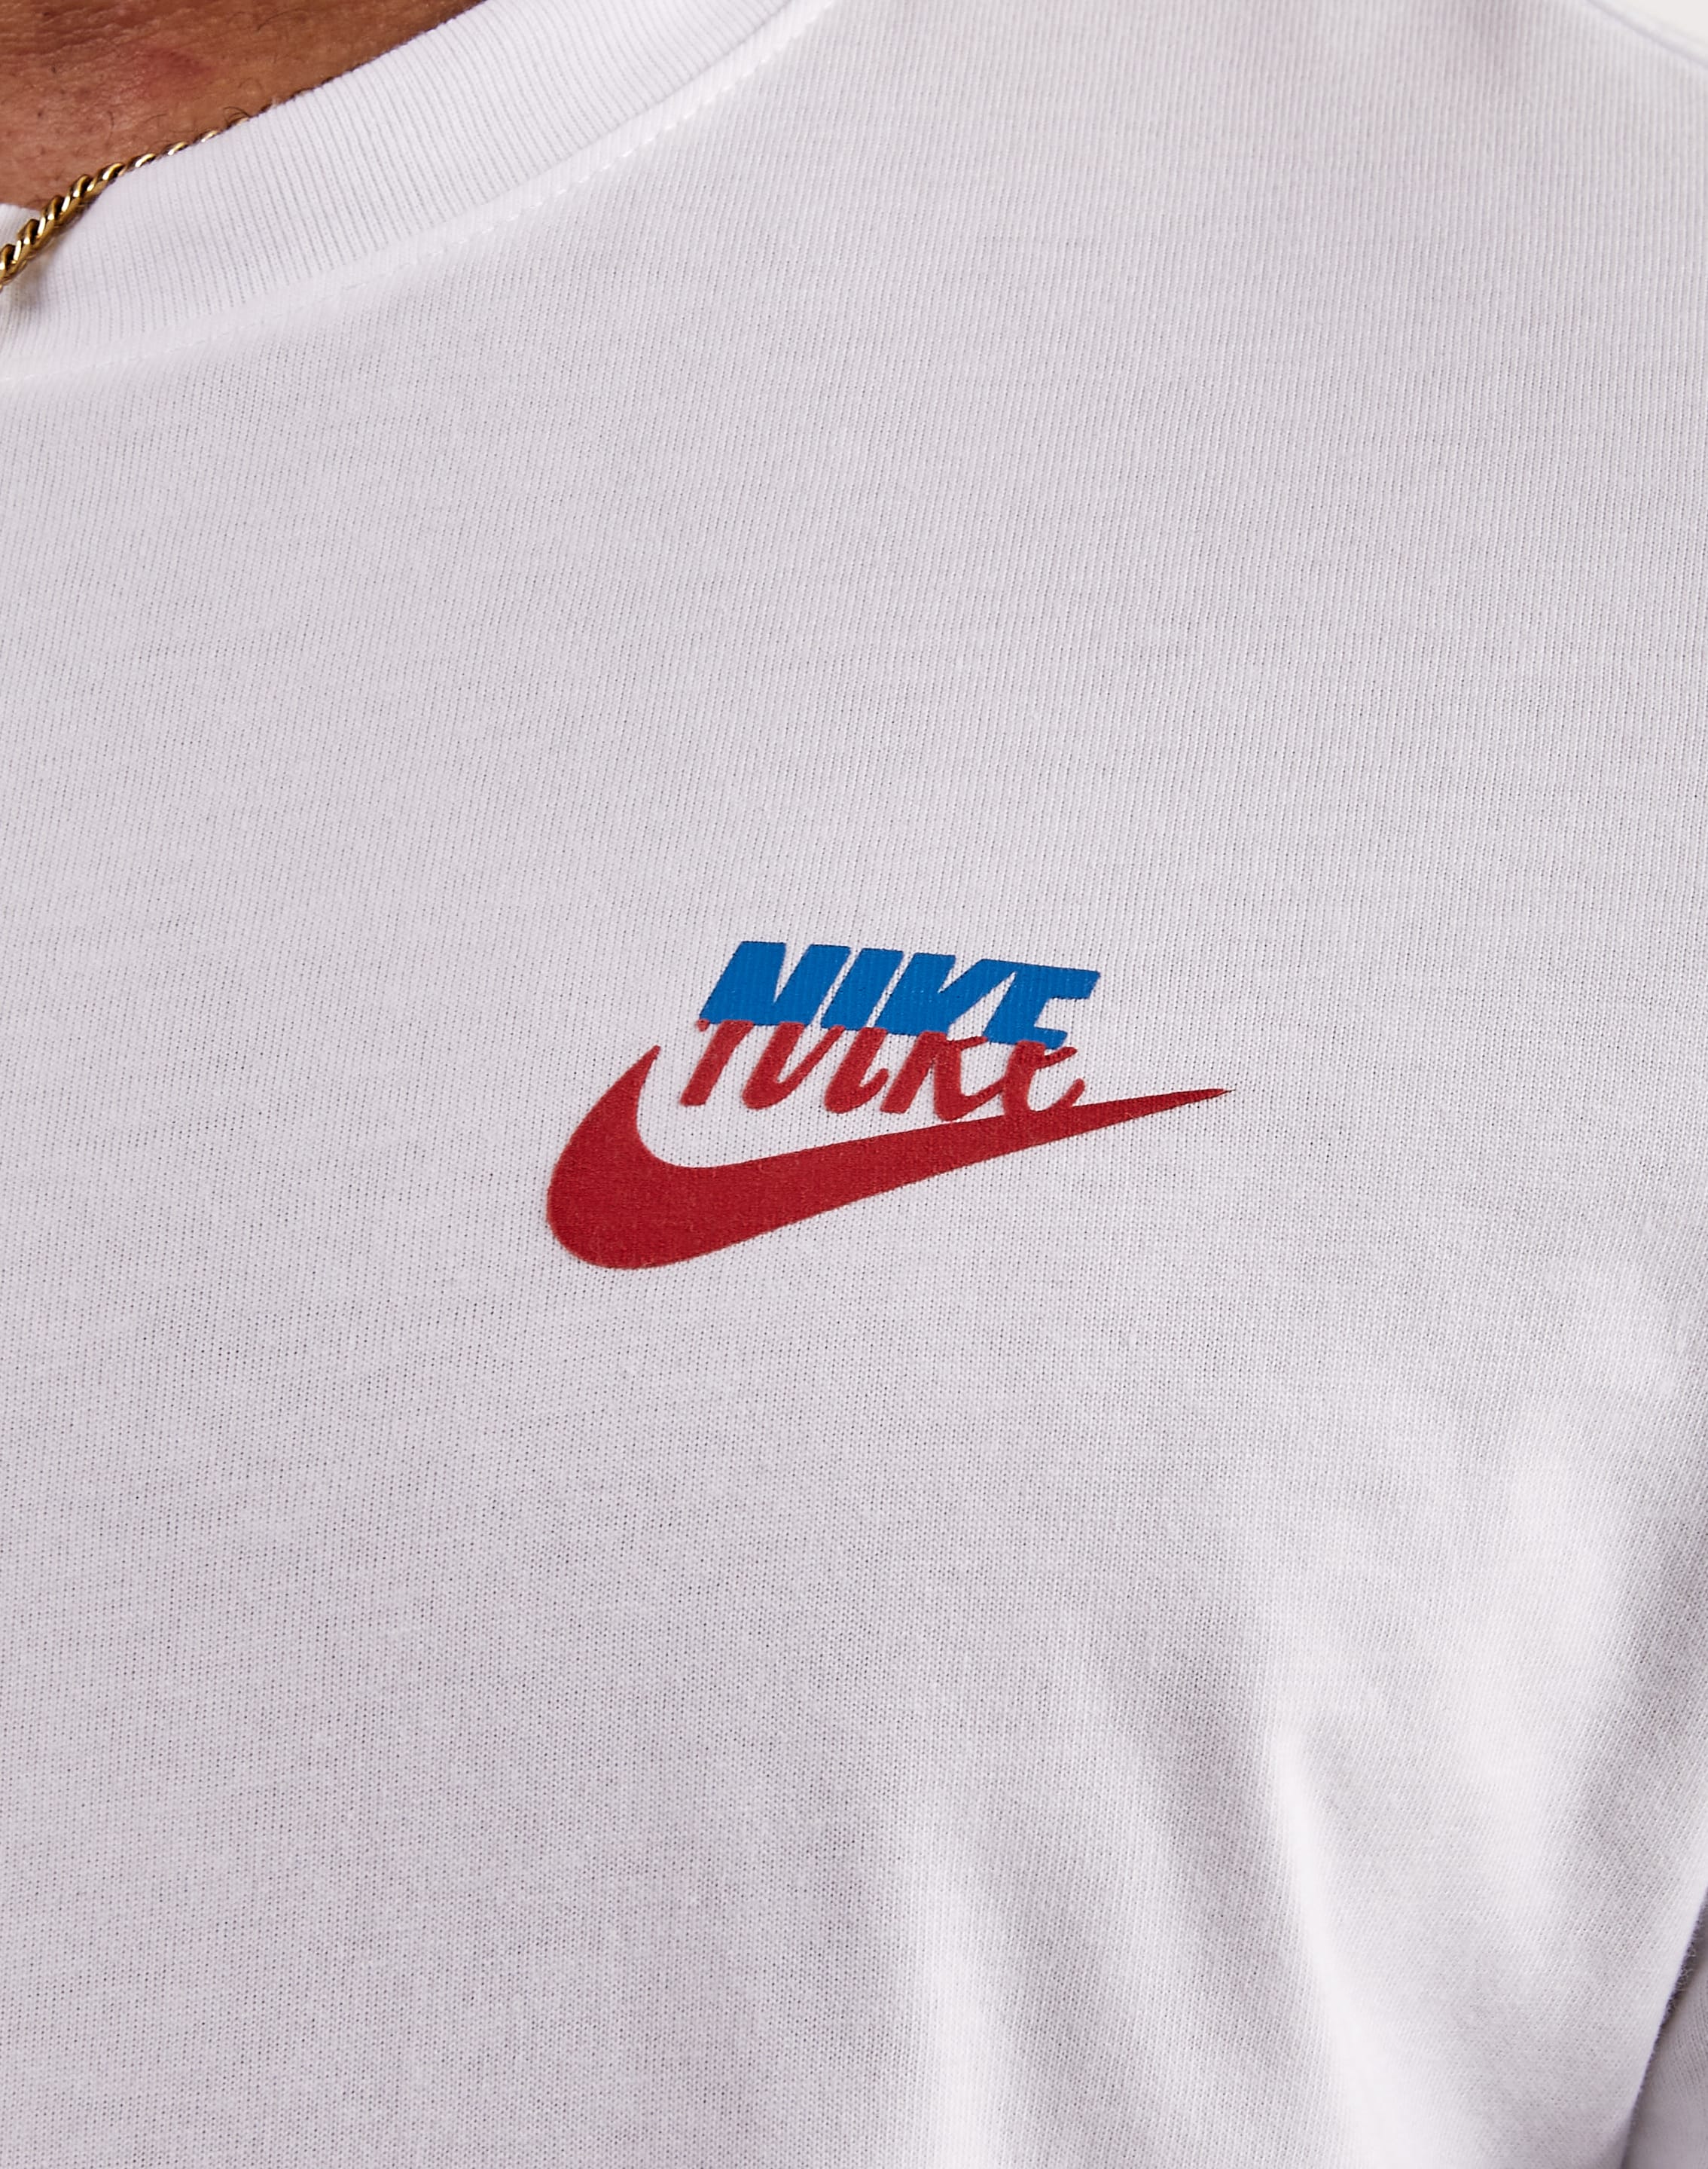 Nike Connect 1 Tee – DTLR